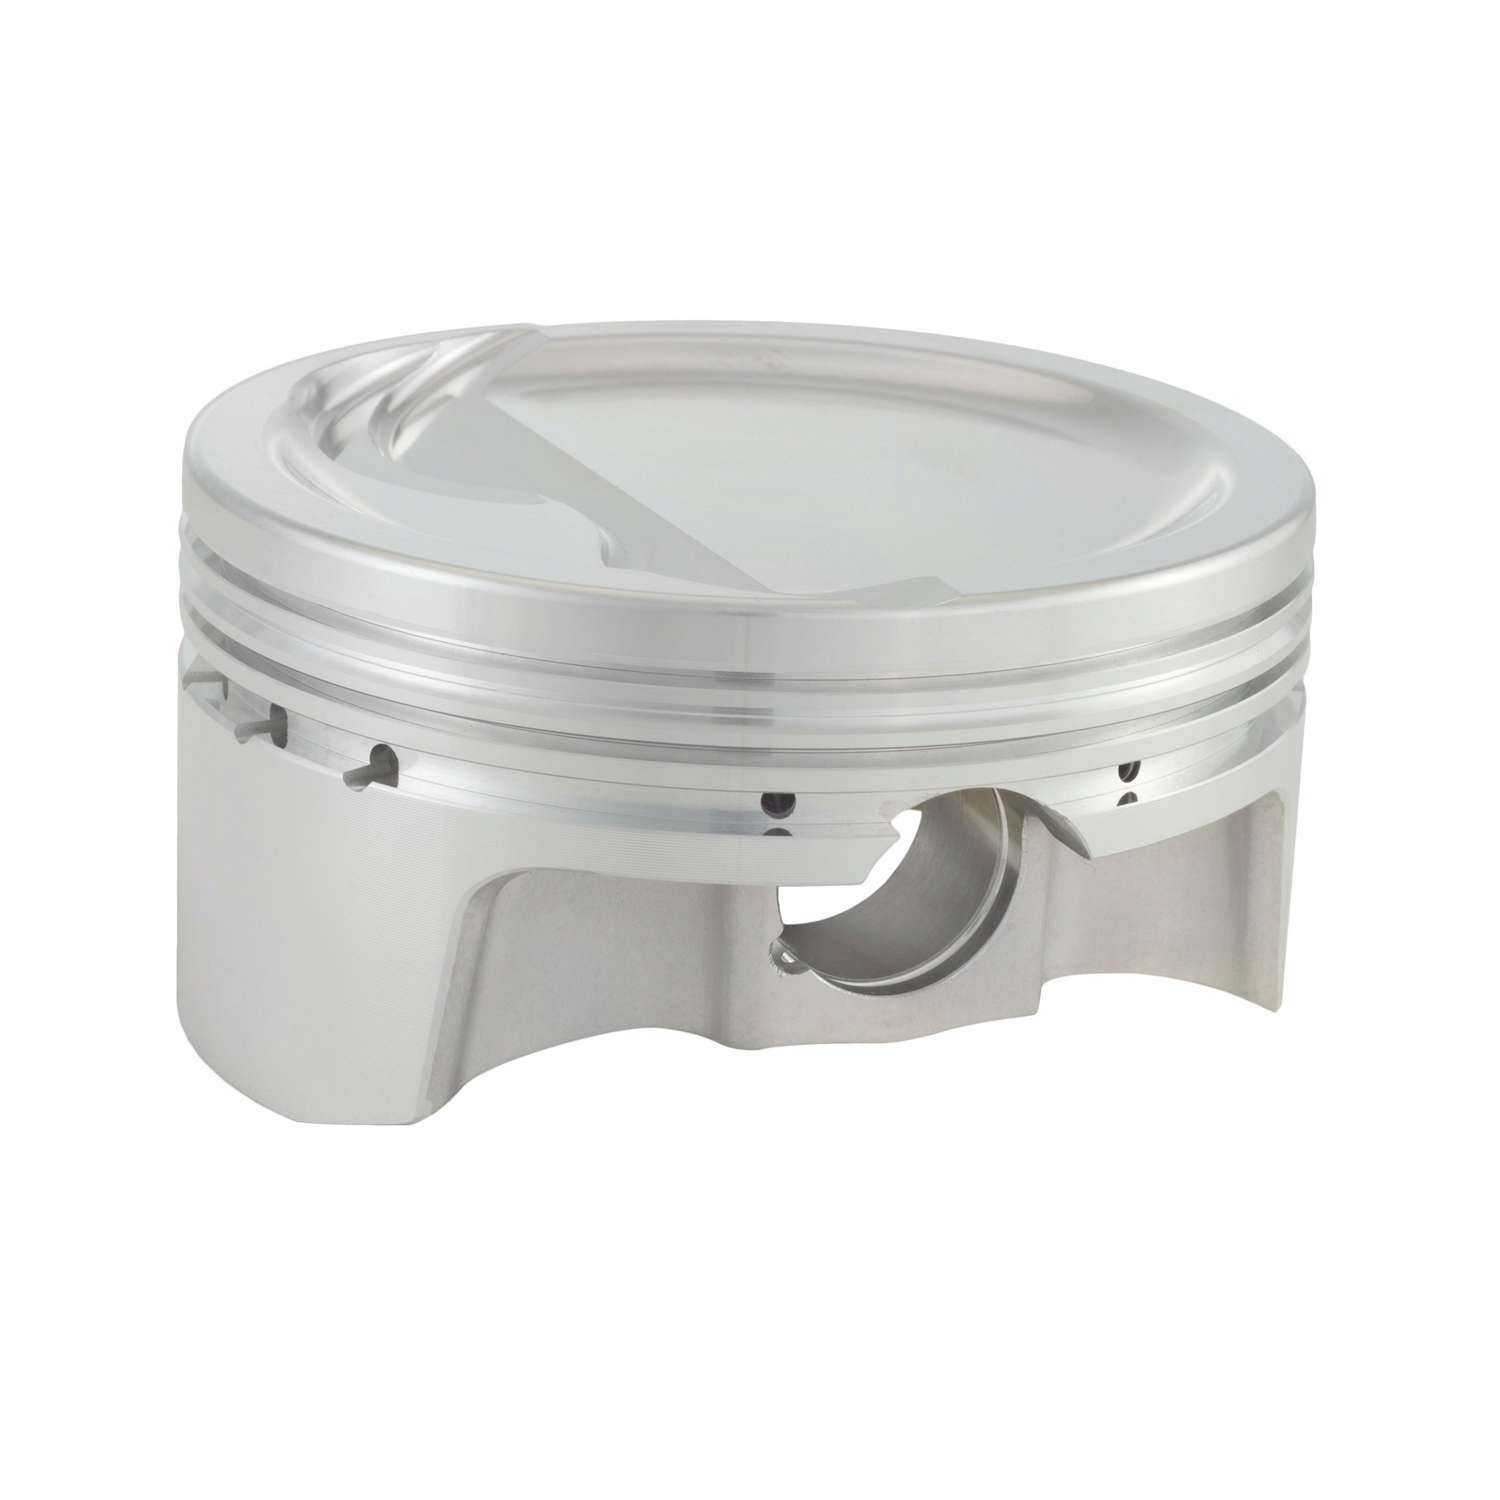 Bullet Pistons BF6121-030-8 Piston and Ring, Forged, 4.155 in Bore, 1.5 x 1.5 x 3 mm Ring Grooves, Minus 20.00 cc, Small Block Ford, Kit